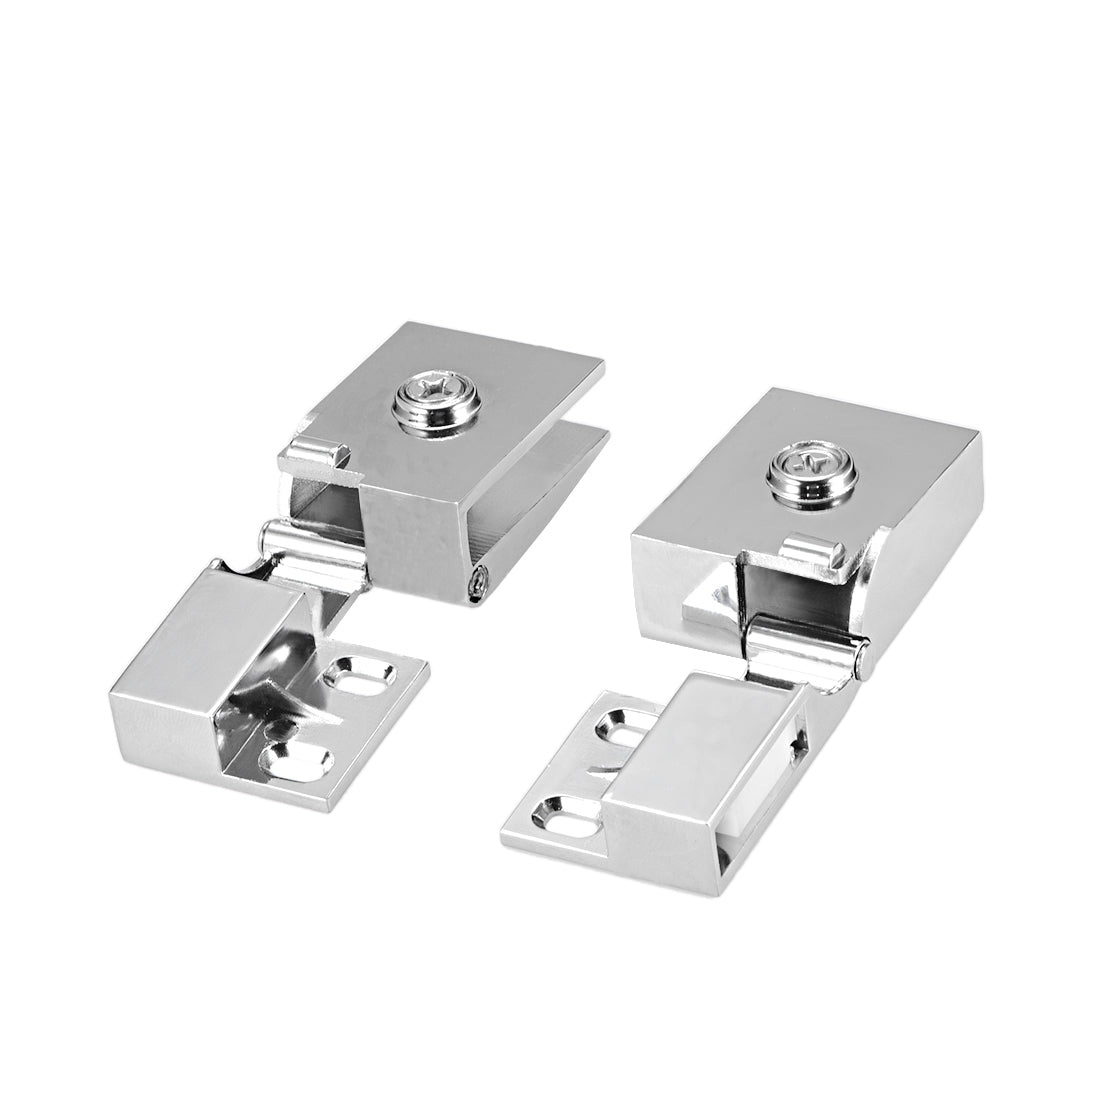 uxcell Uxcell 2 Pair Glass Door Hinge Cupboard Showcase Cabinet Door Hinge Glass Clamp,for 3-5mm Glass Thickness,Zinc Alloy